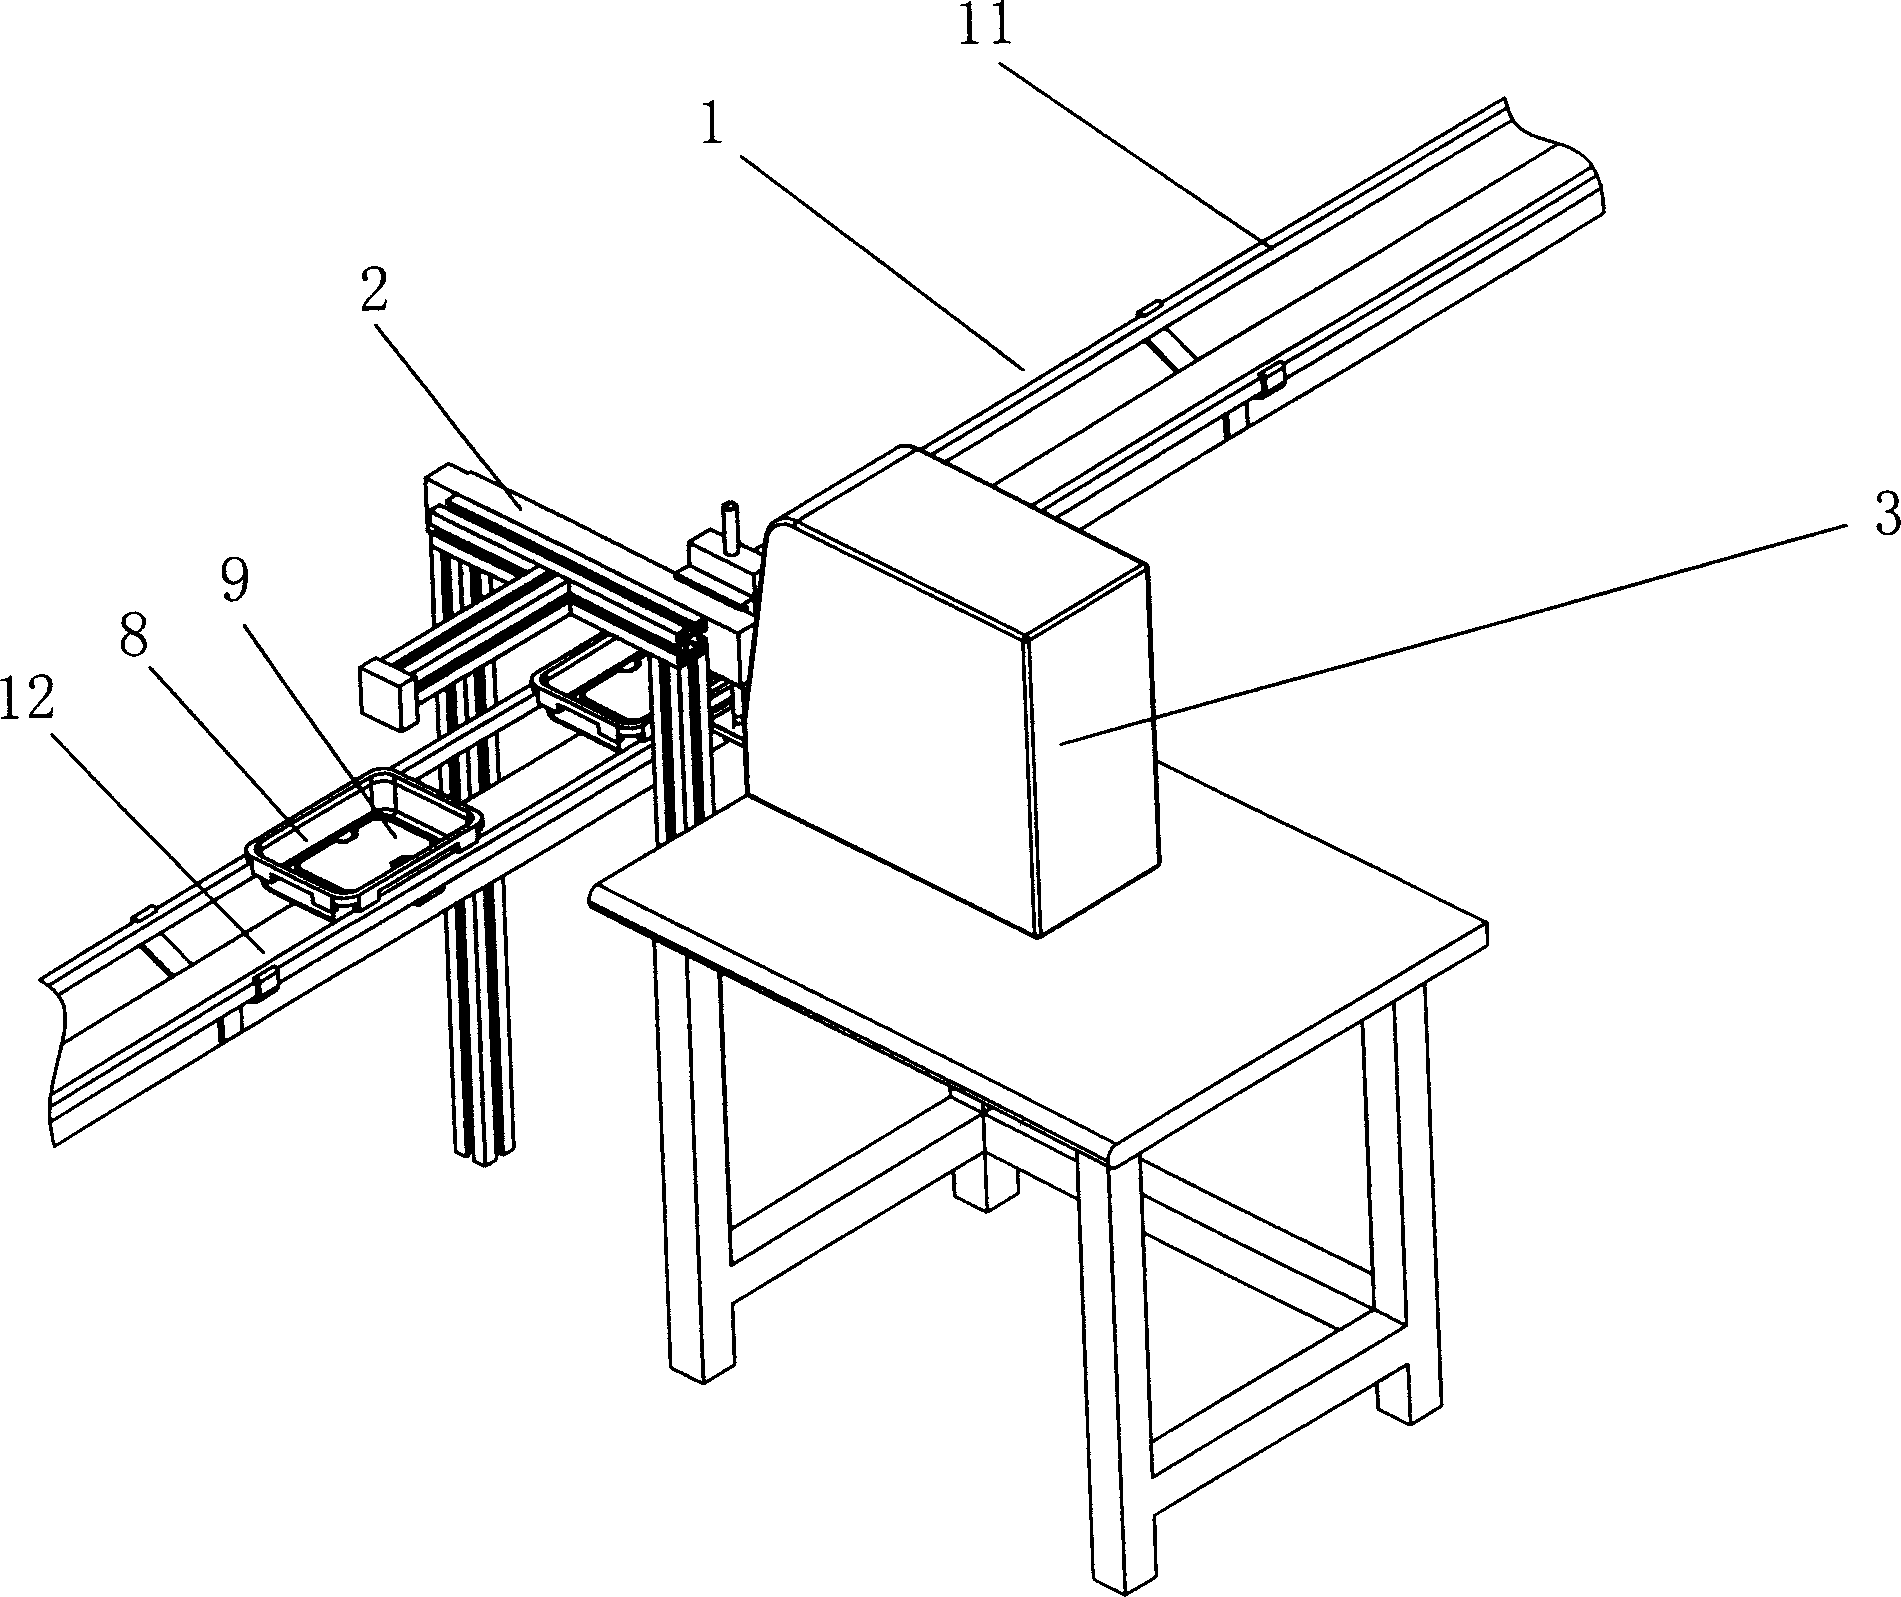 Automatic labeling system and method for hard disk